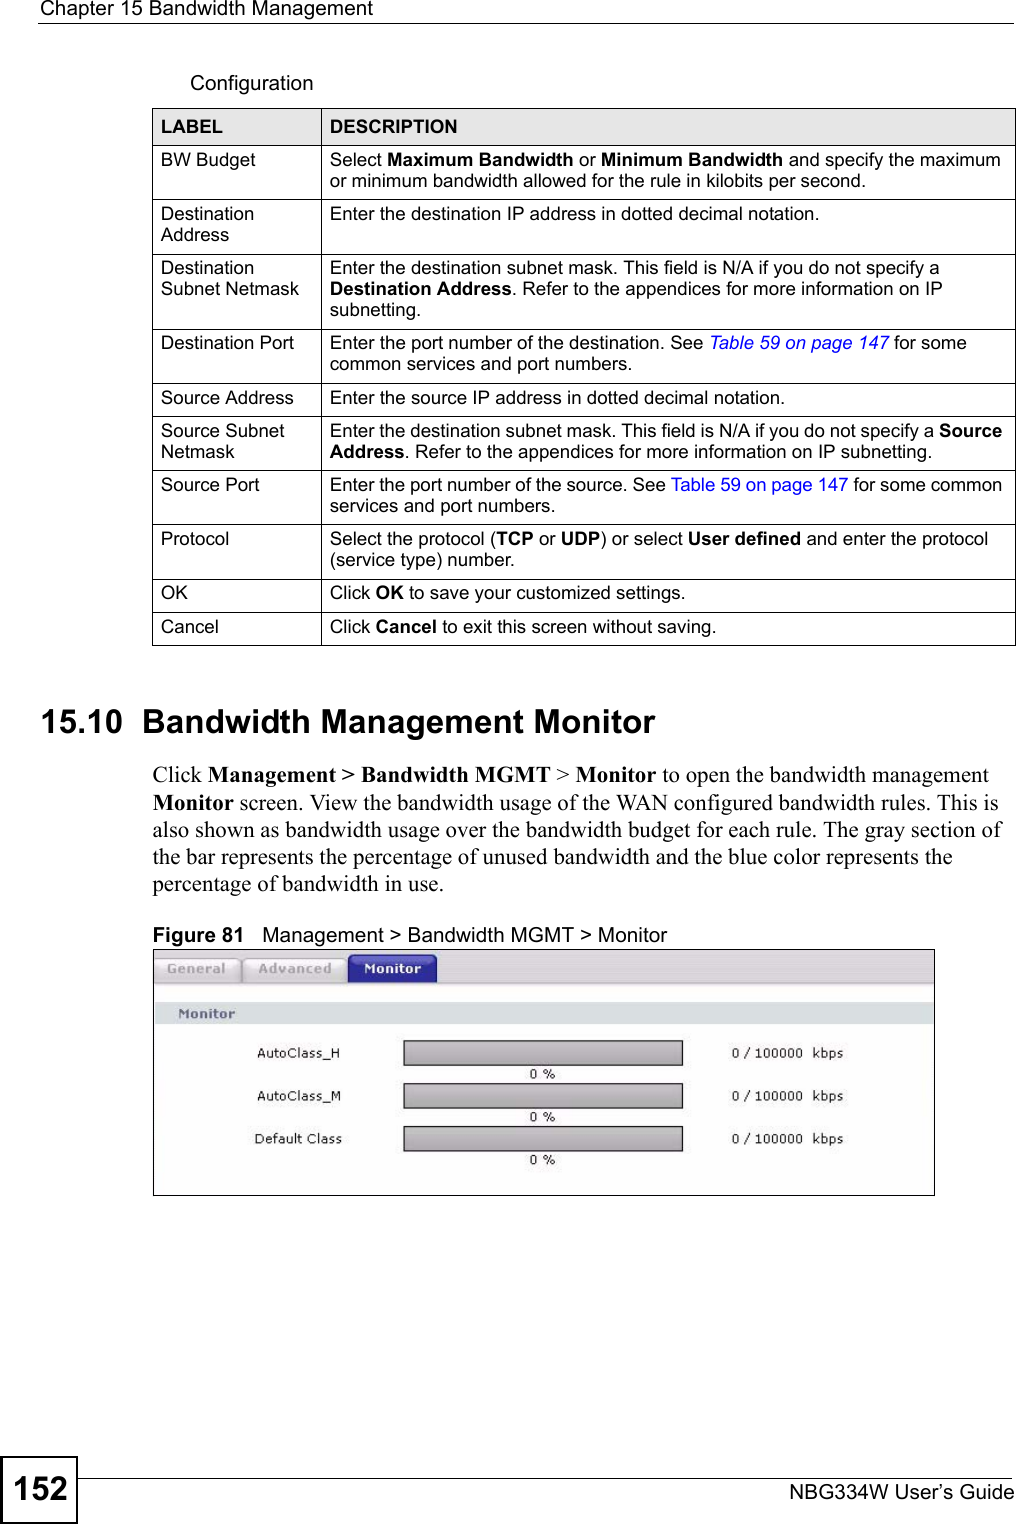 Chapter 15 Bandwidth ManagementNBG334W User’s Guide152Configuration  15.10  Bandwidth Management Monitor    Click Management &gt; Bandwidth MGMT &gt; Monitor to open the bandwidth management Monitor screen. View the bandwidth usage of the WAN configured bandwidth rules. This is also shown as bandwidth usage over the bandwidth budget for each rule. The gray section of the bar represents the percentage of unused bandwidth and the blue color represents the percentage of bandwidth in use.Figure 81   Management &gt; Bandwidth MGMT &gt; Monitor LABEL DESCRIPTIONBW Budget Select Maximum Bandwidth or Minimum Bandwidth and specify the maximum or minimum bandwidth allowed for the rule in kilobits per second. Destination AddressEnter the destination IP address in dotted decimal notation.Destination Subnet NetmaskEnter the destination subnet mask. This field is N/A if you do not specify a Destination Address. Refer to the appendices for more information on IP subnetting.Destination Port Enter the port number of the destination. See Table 59 on page 147 for some common services and port numbers.Source Address Enter the source IP address in dotted decimal notation.Source Subnet NetmaskEnter the destination subnet mask. This field is N/A if you do not specify a Source Address. Refer to the appendices for more information on IP subnetting.Source Port Enter the port number of the source. See Table 59 on page 147 for some common services and port numbers.Protocol Select the protocol (TCP or UDP) or select User defined and enter the protocol (service type) number. OK Click OK to save your customized settings.Cancel Click Cancel to exit this screen without saving.